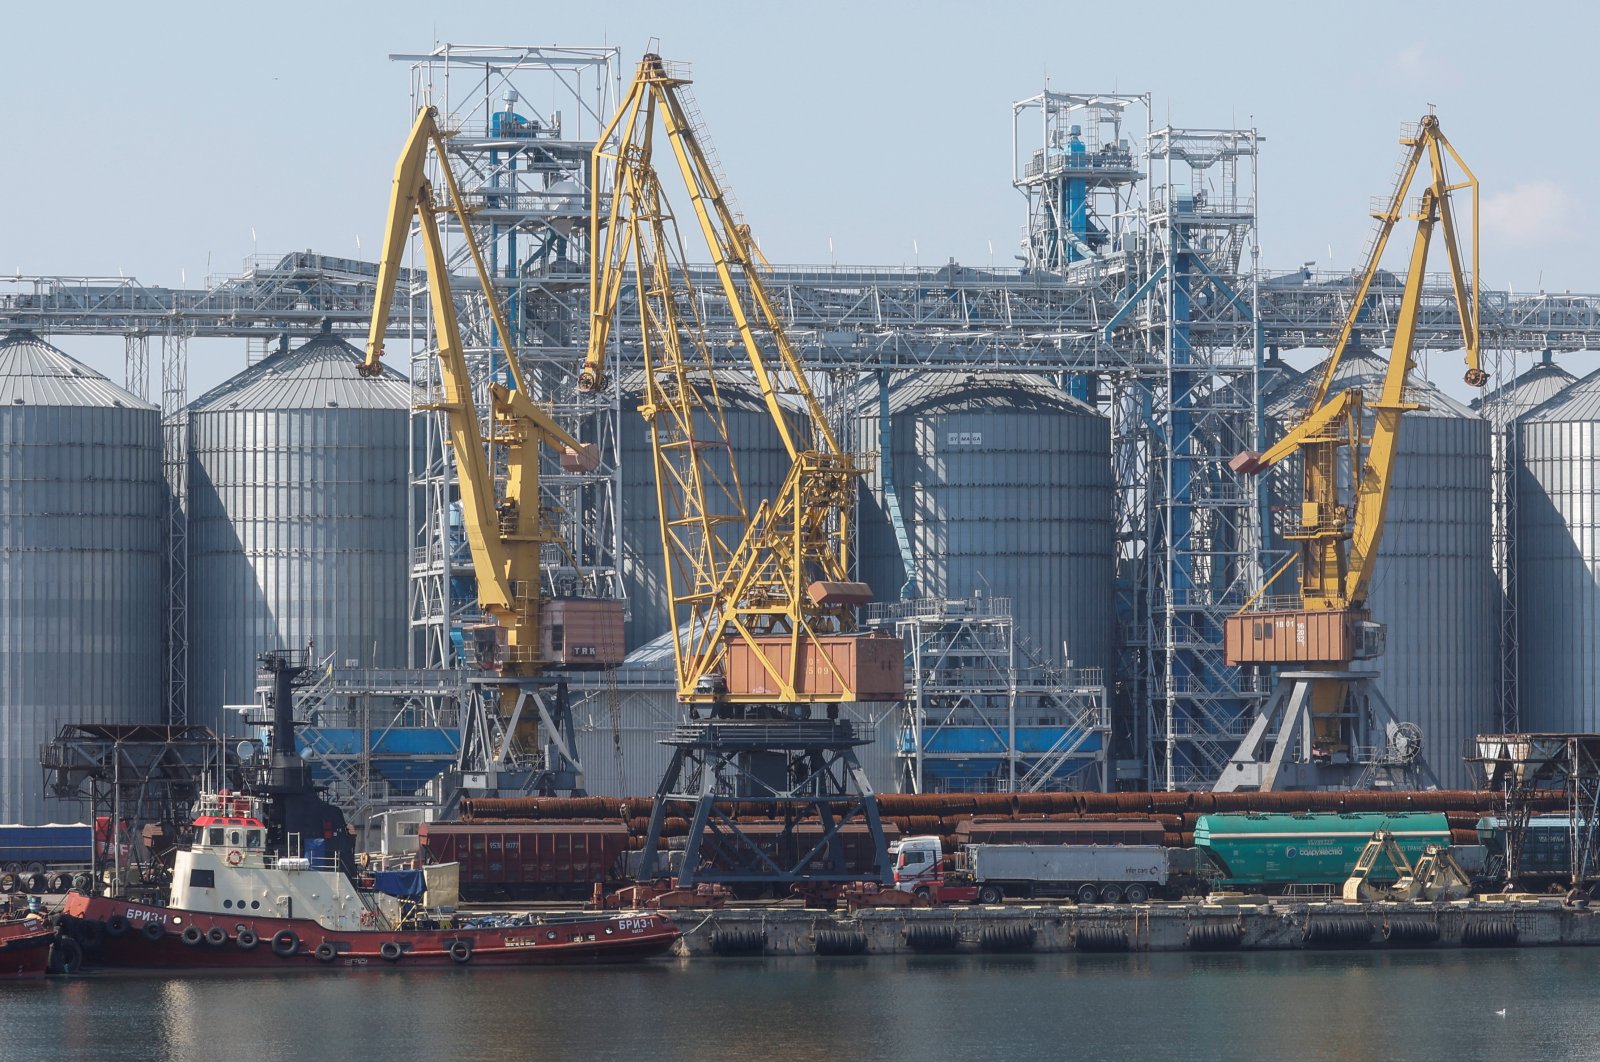 A view shows a grain terminal in the seaport in Odessa after restarting grain export, Ukraine, Aug. 19, 2022. (Reuters Photo)